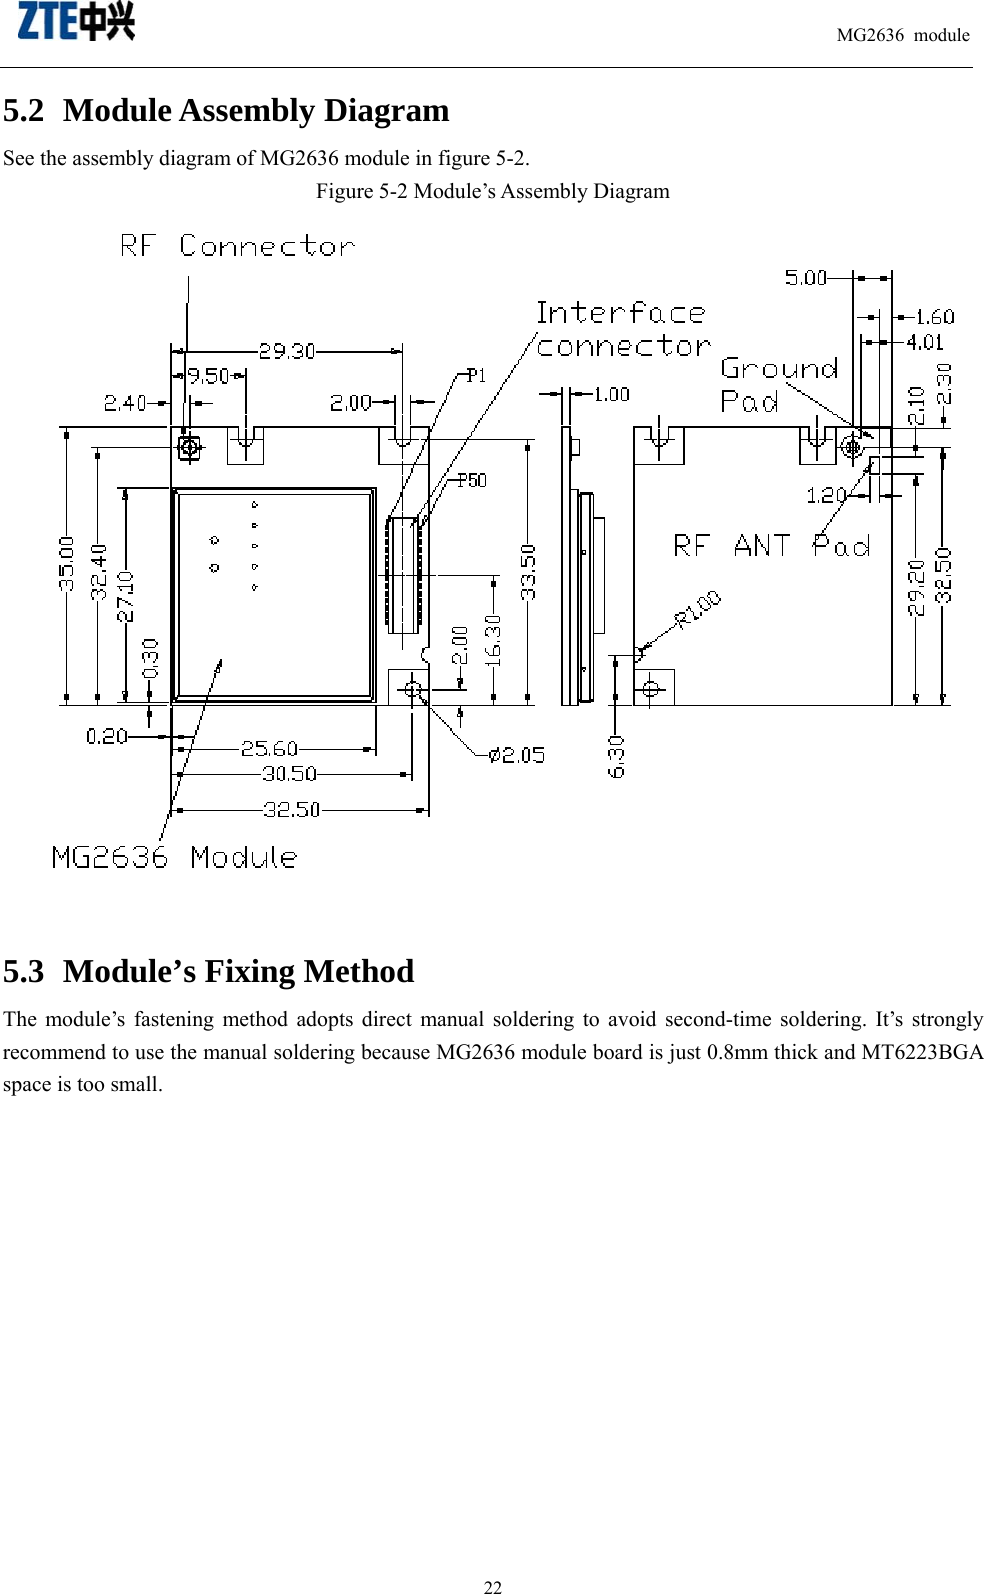                                                                          MG2636 module                                                    225.2 Module Assembly Diagram   See the assembly diagram of MG2636 module in figure 5-2.   Figure 5-2 Module’s Assembly Diagram    5.3 Module’s Fixing Method   The module’s fastening method adopts direct manual soldering to avoid second-time soldering. It’s strongly recommend to use the manual soldering because MG2636 module board is just 0.8mm thick and MT6223BGA space is too small.                